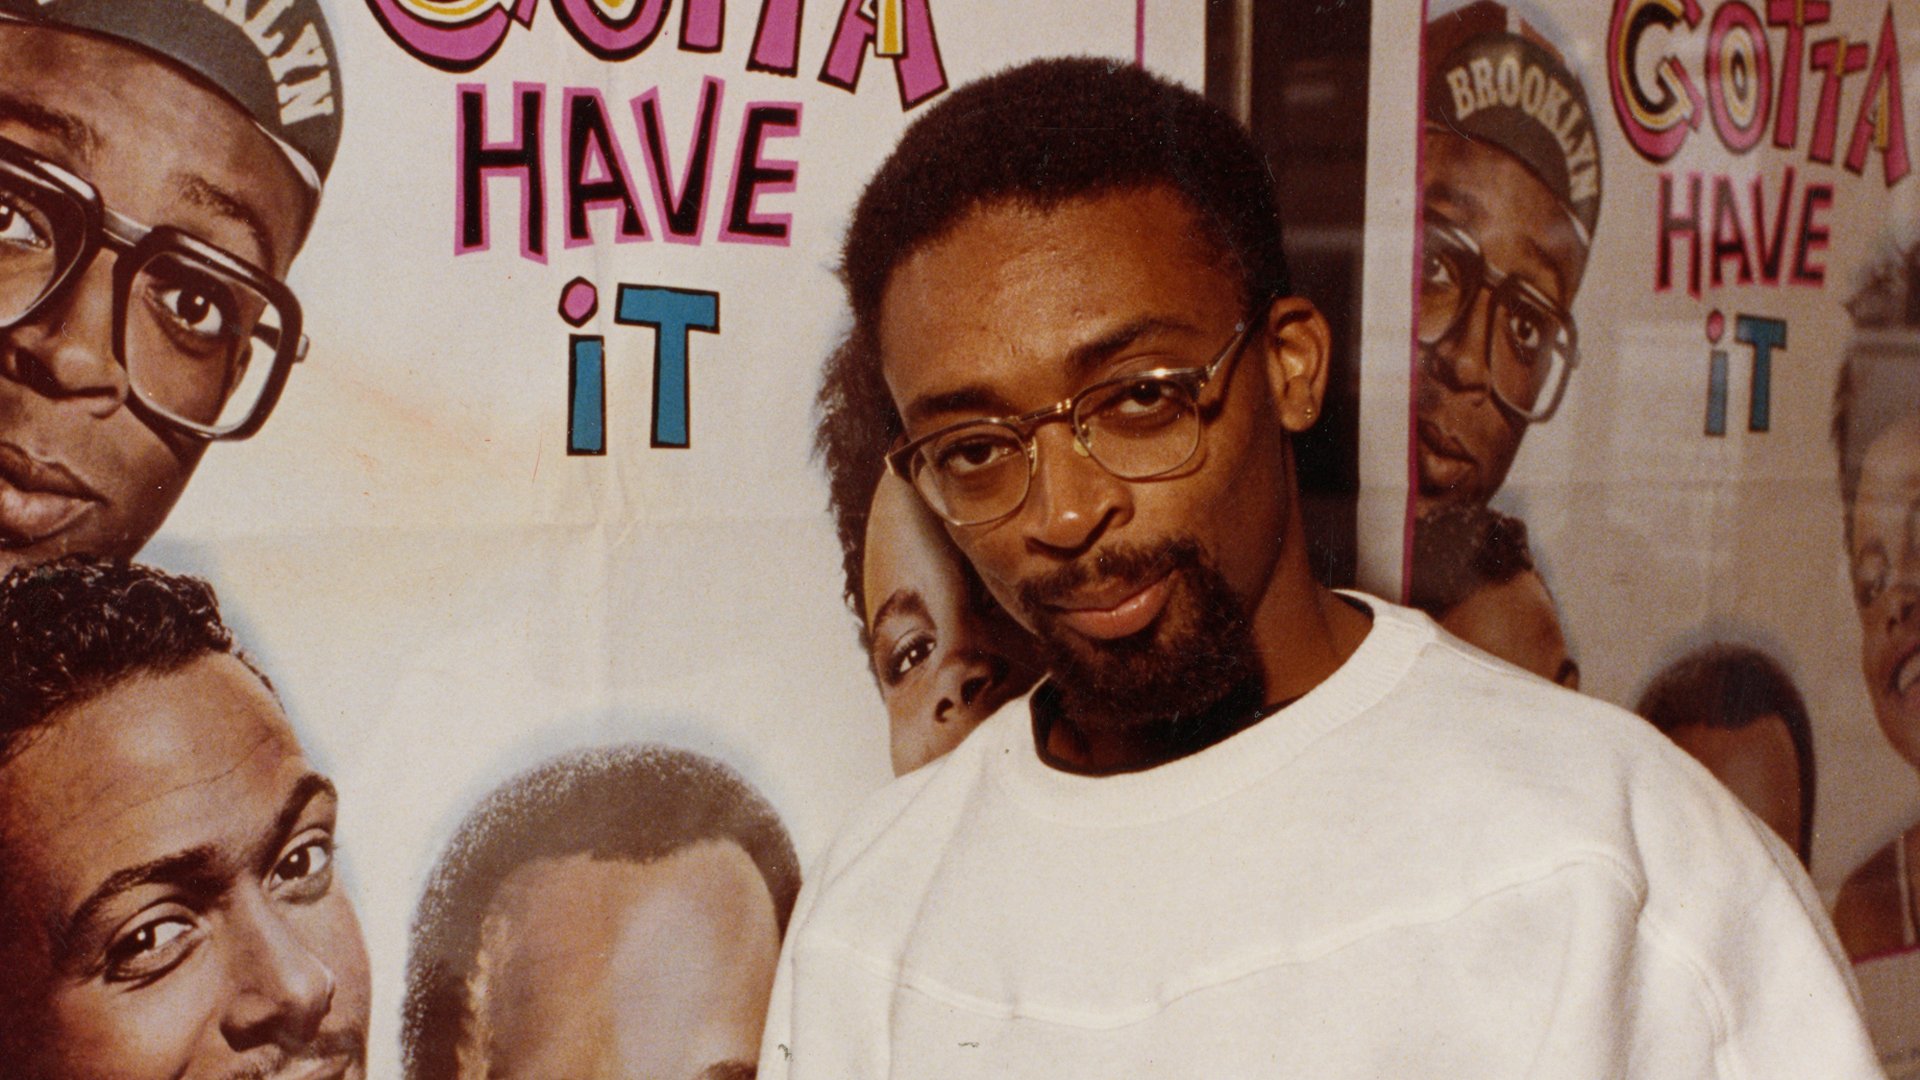 Spike Lee, the director of She's Gotta Have It, poses at the Greenwich Village Theater in New York on Sept. 28, 1986. 